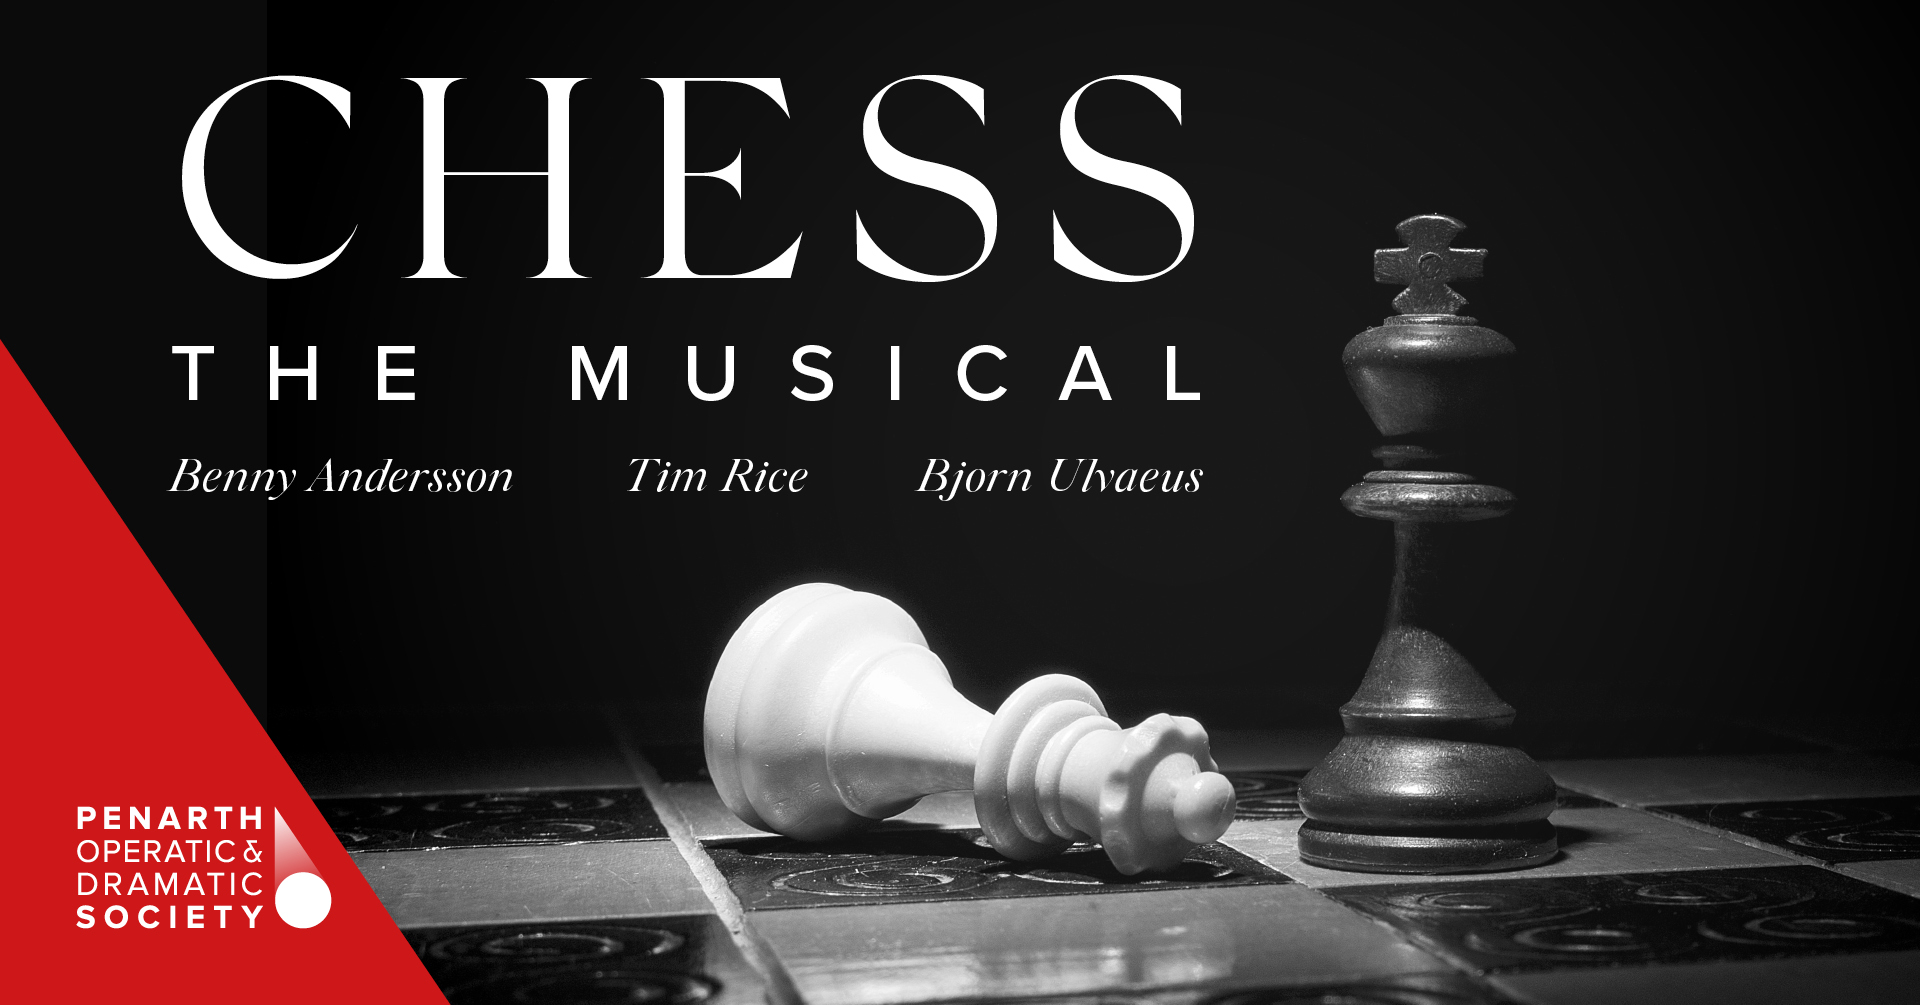 bind Inspicere lejesoldat Sir Tim Rice has good luck message for Chess mates | Local News | News |  Penarth Nub News